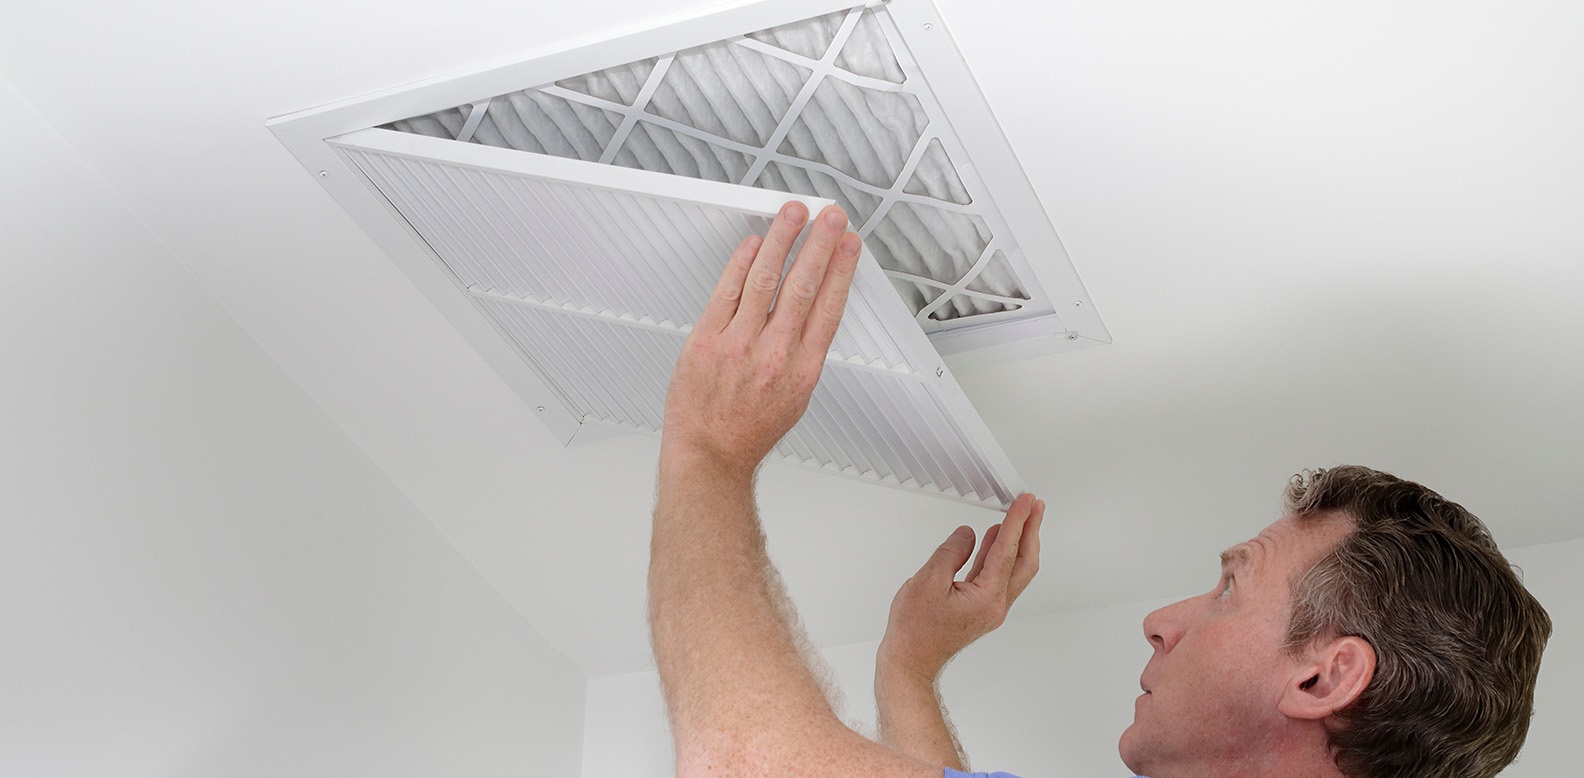 Few Considerations before Hiring a Ducted Heating Company